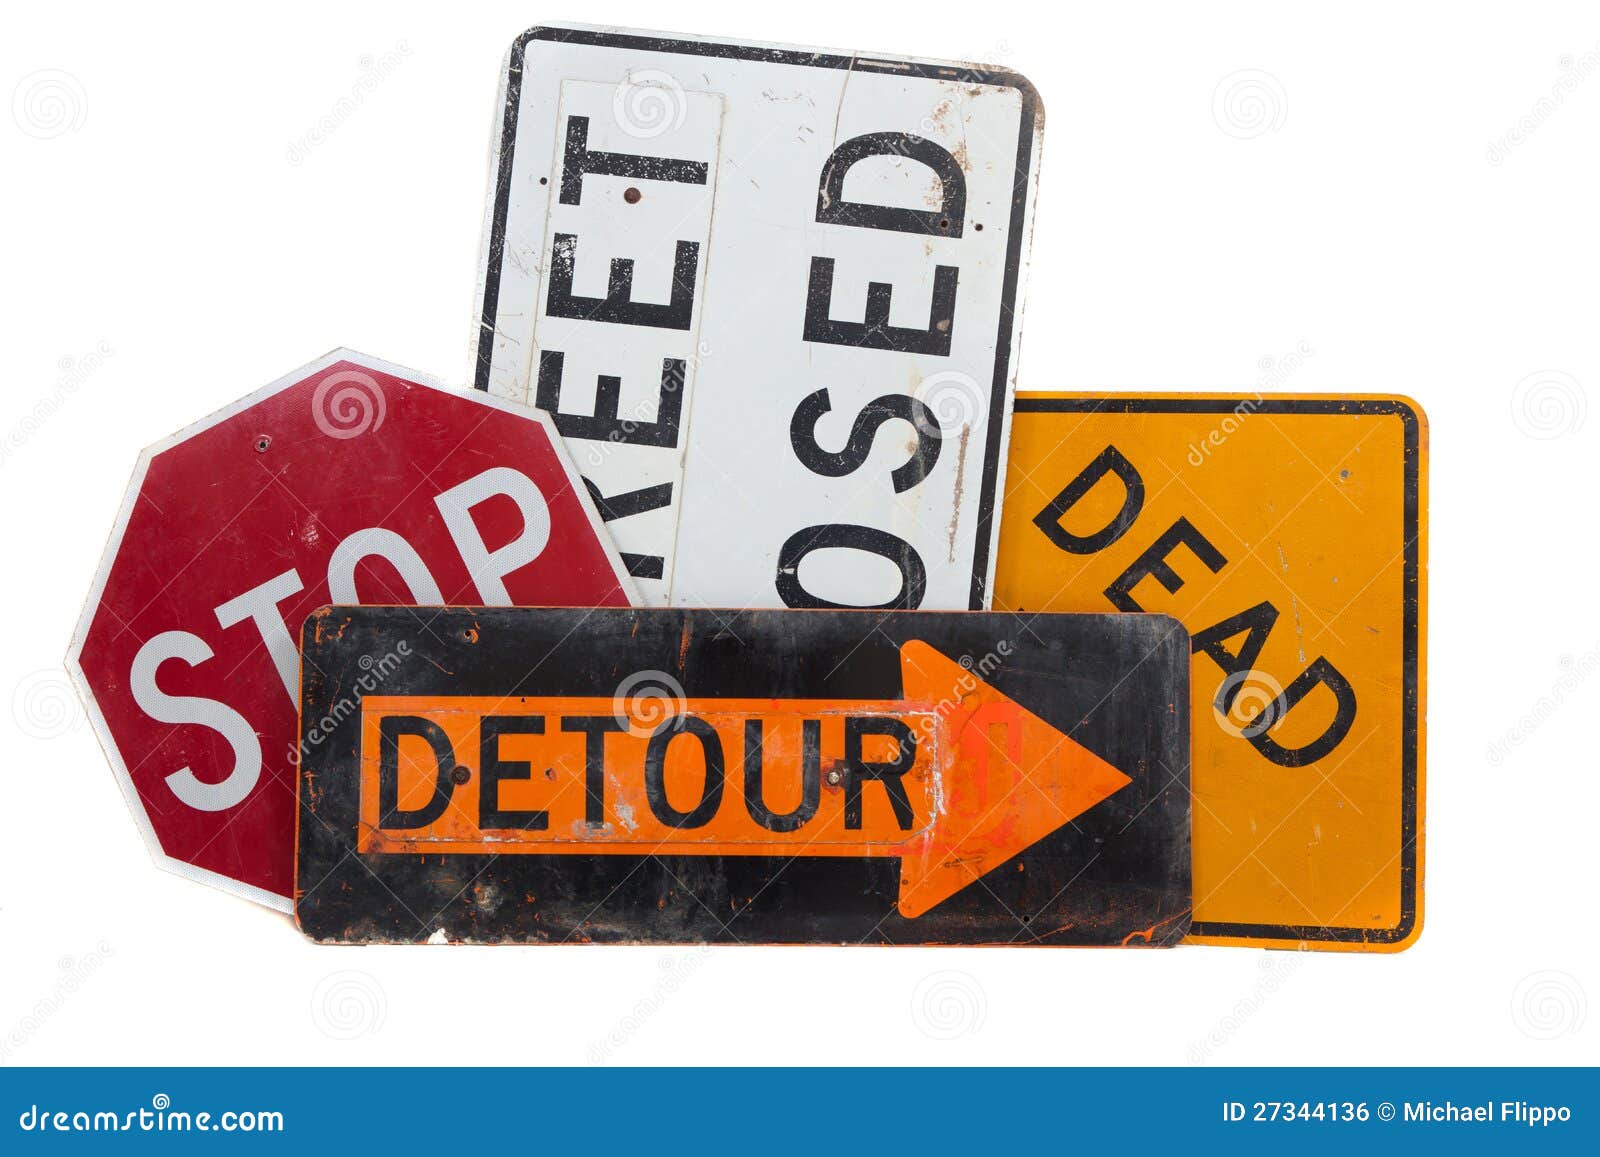 various road signs on a white background